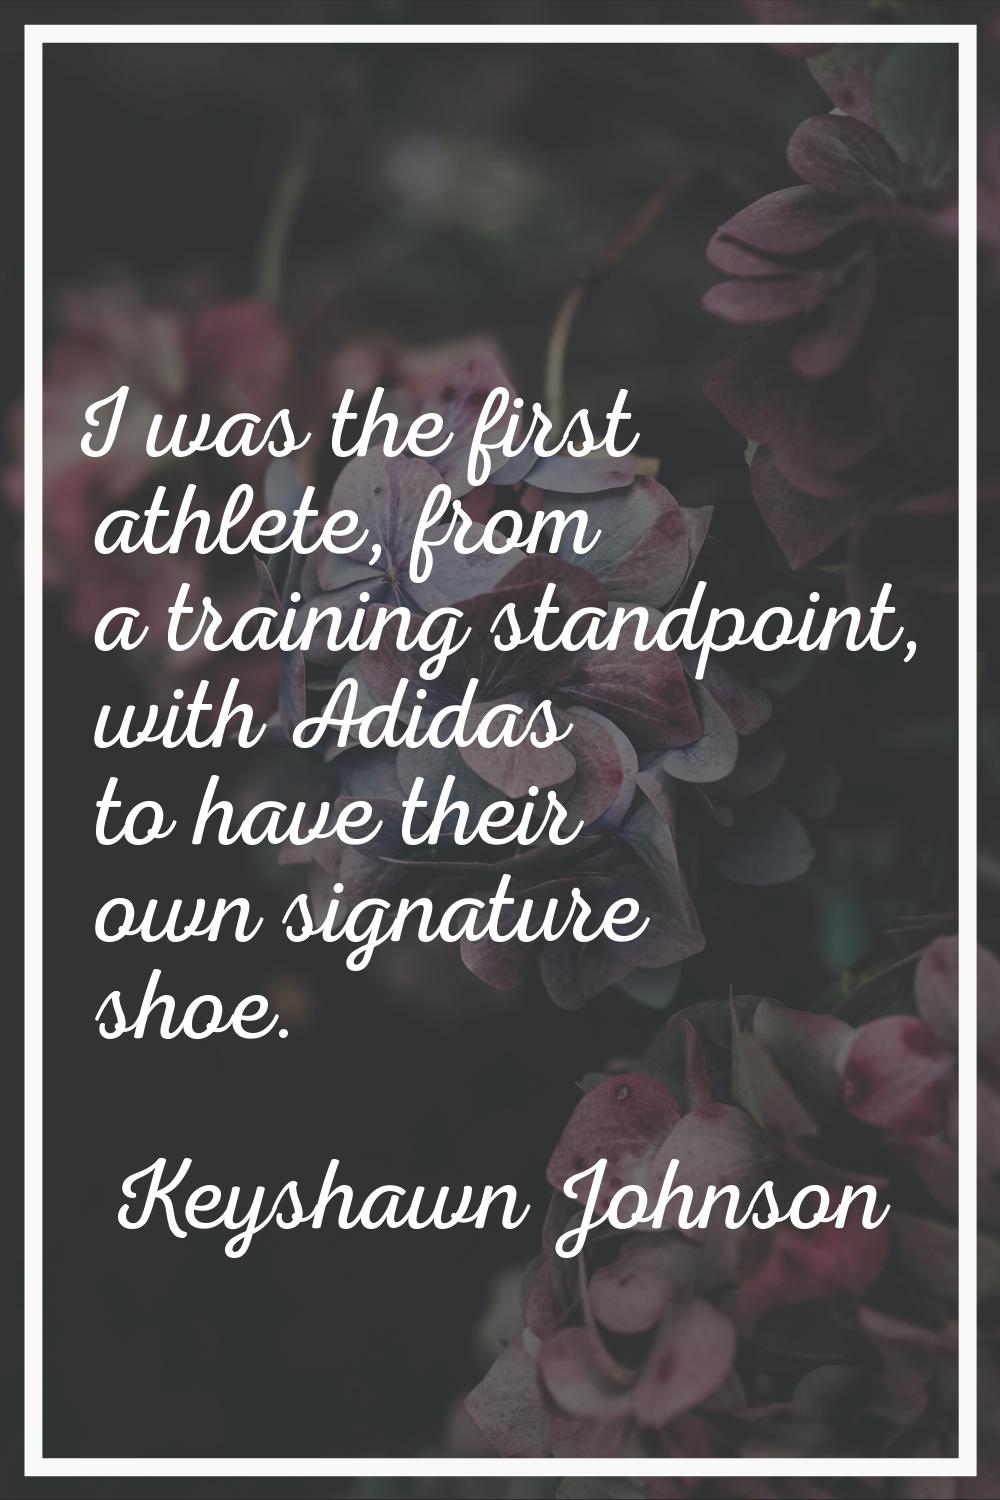 I was the first athlete, from a training standpoint, with Adidas to have their own signature shoe.